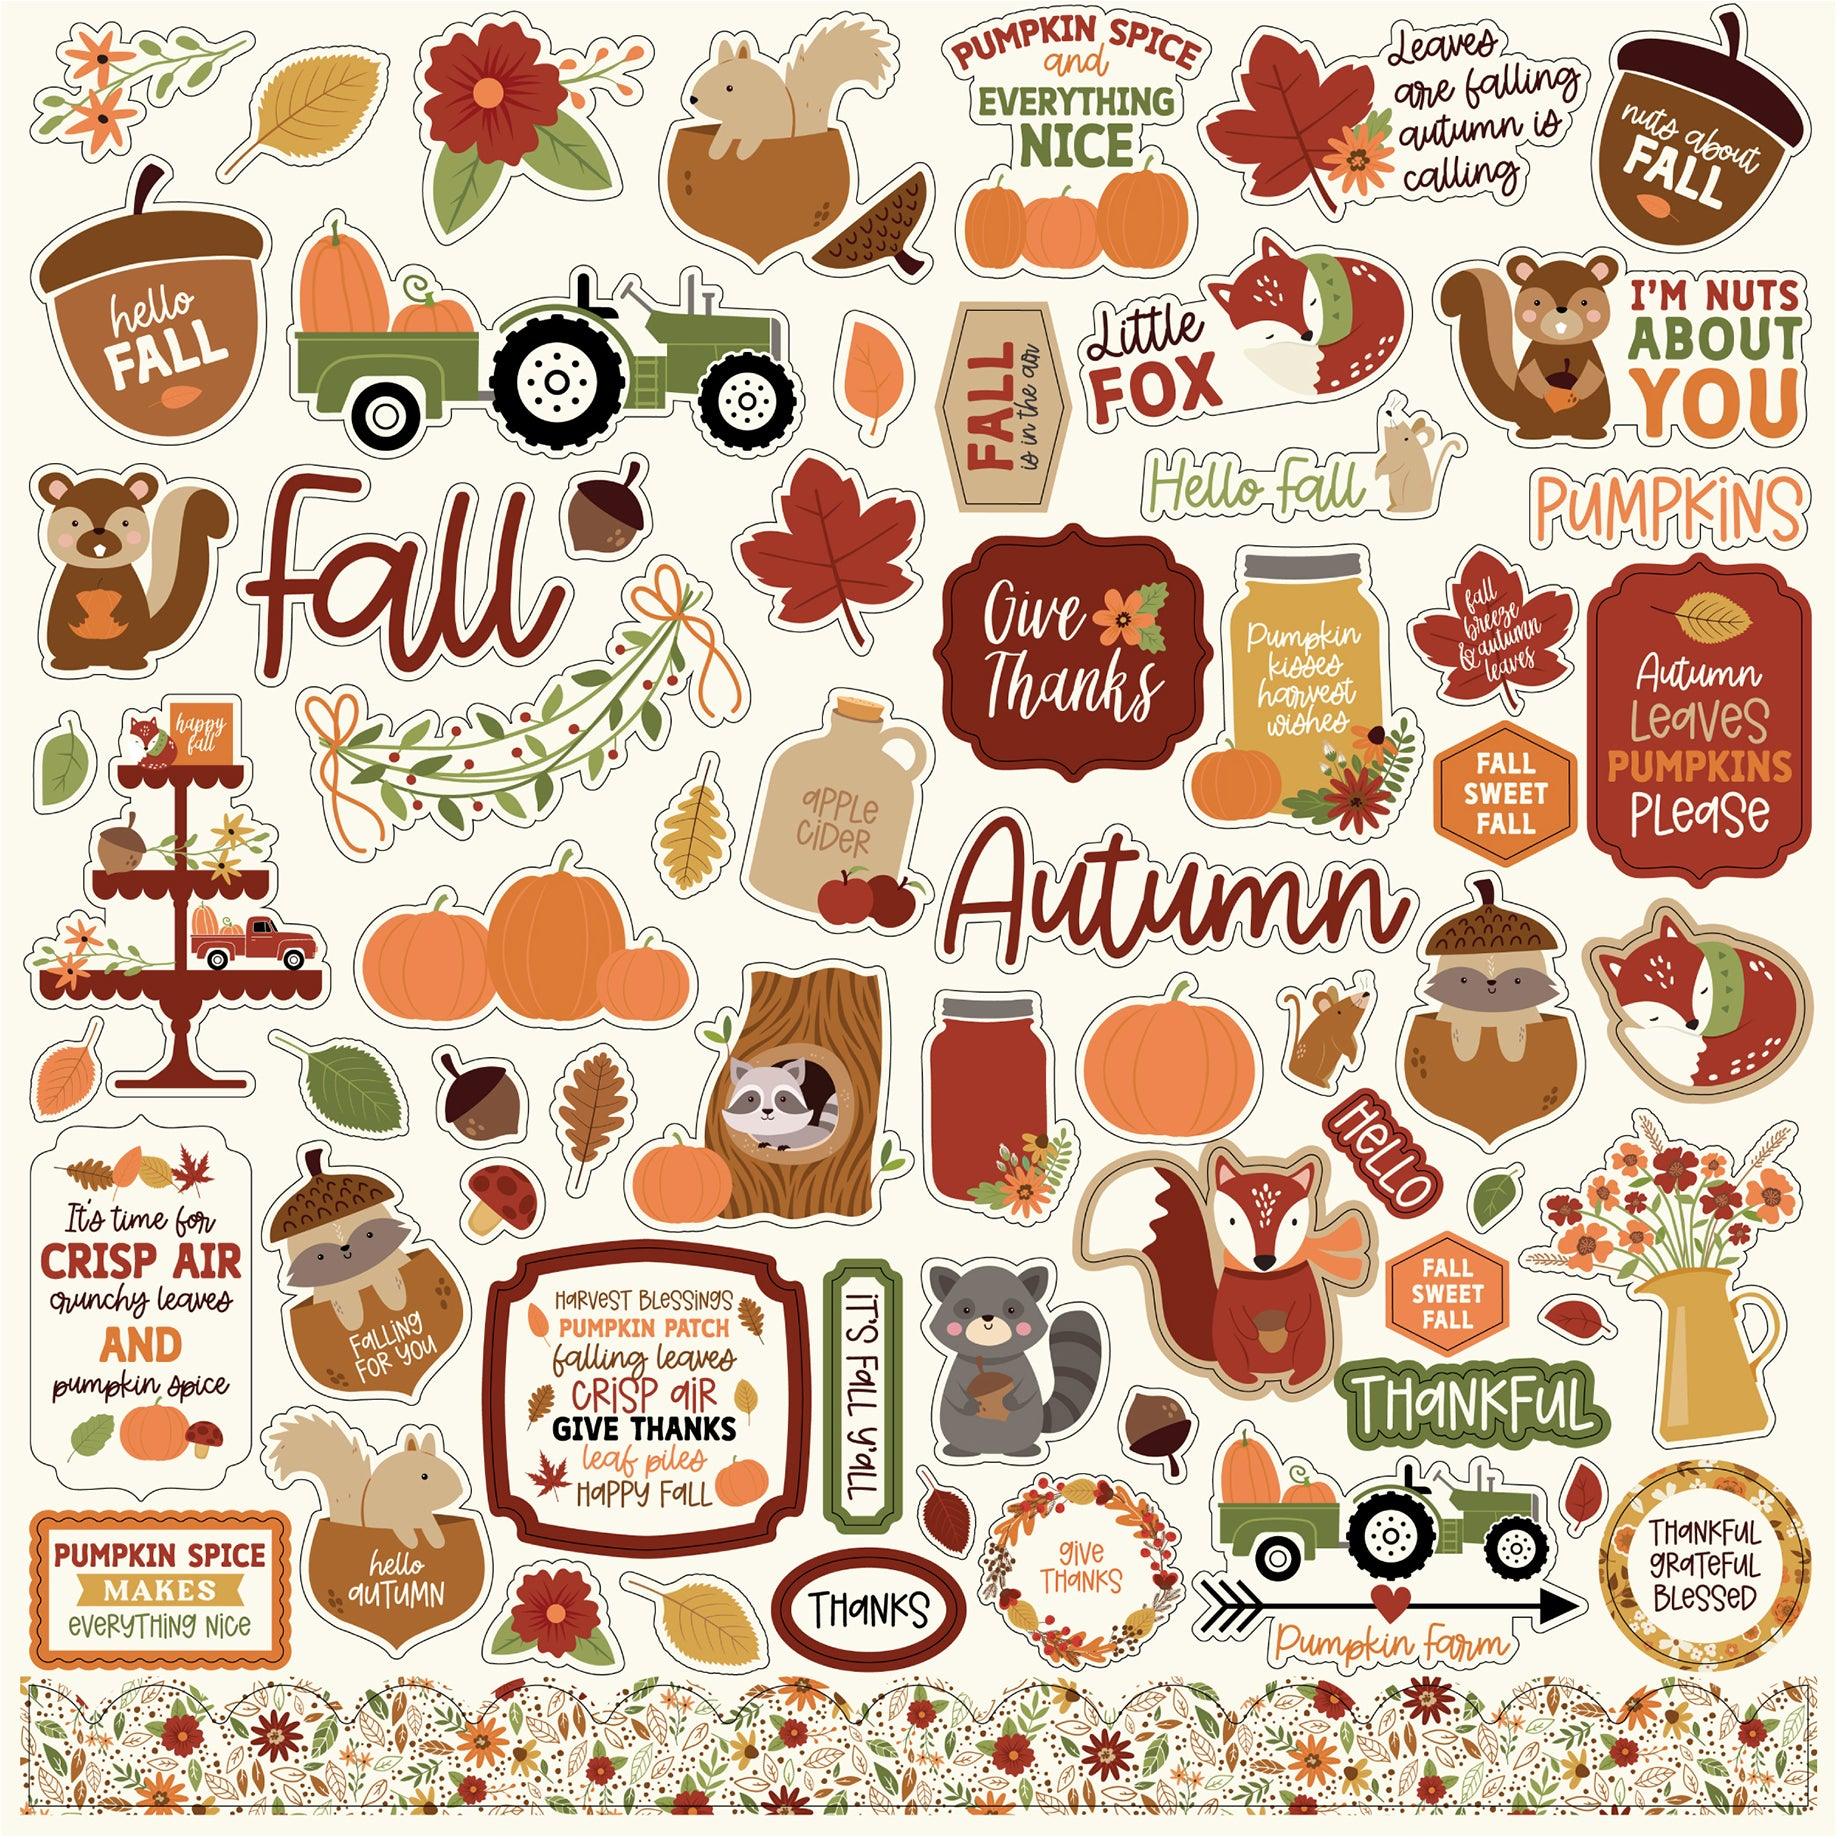 I Love Fall Collection 12 x 12 Scrapbook Sticker Sheet by Echo Park Paper - Scrapbook Supply Companies